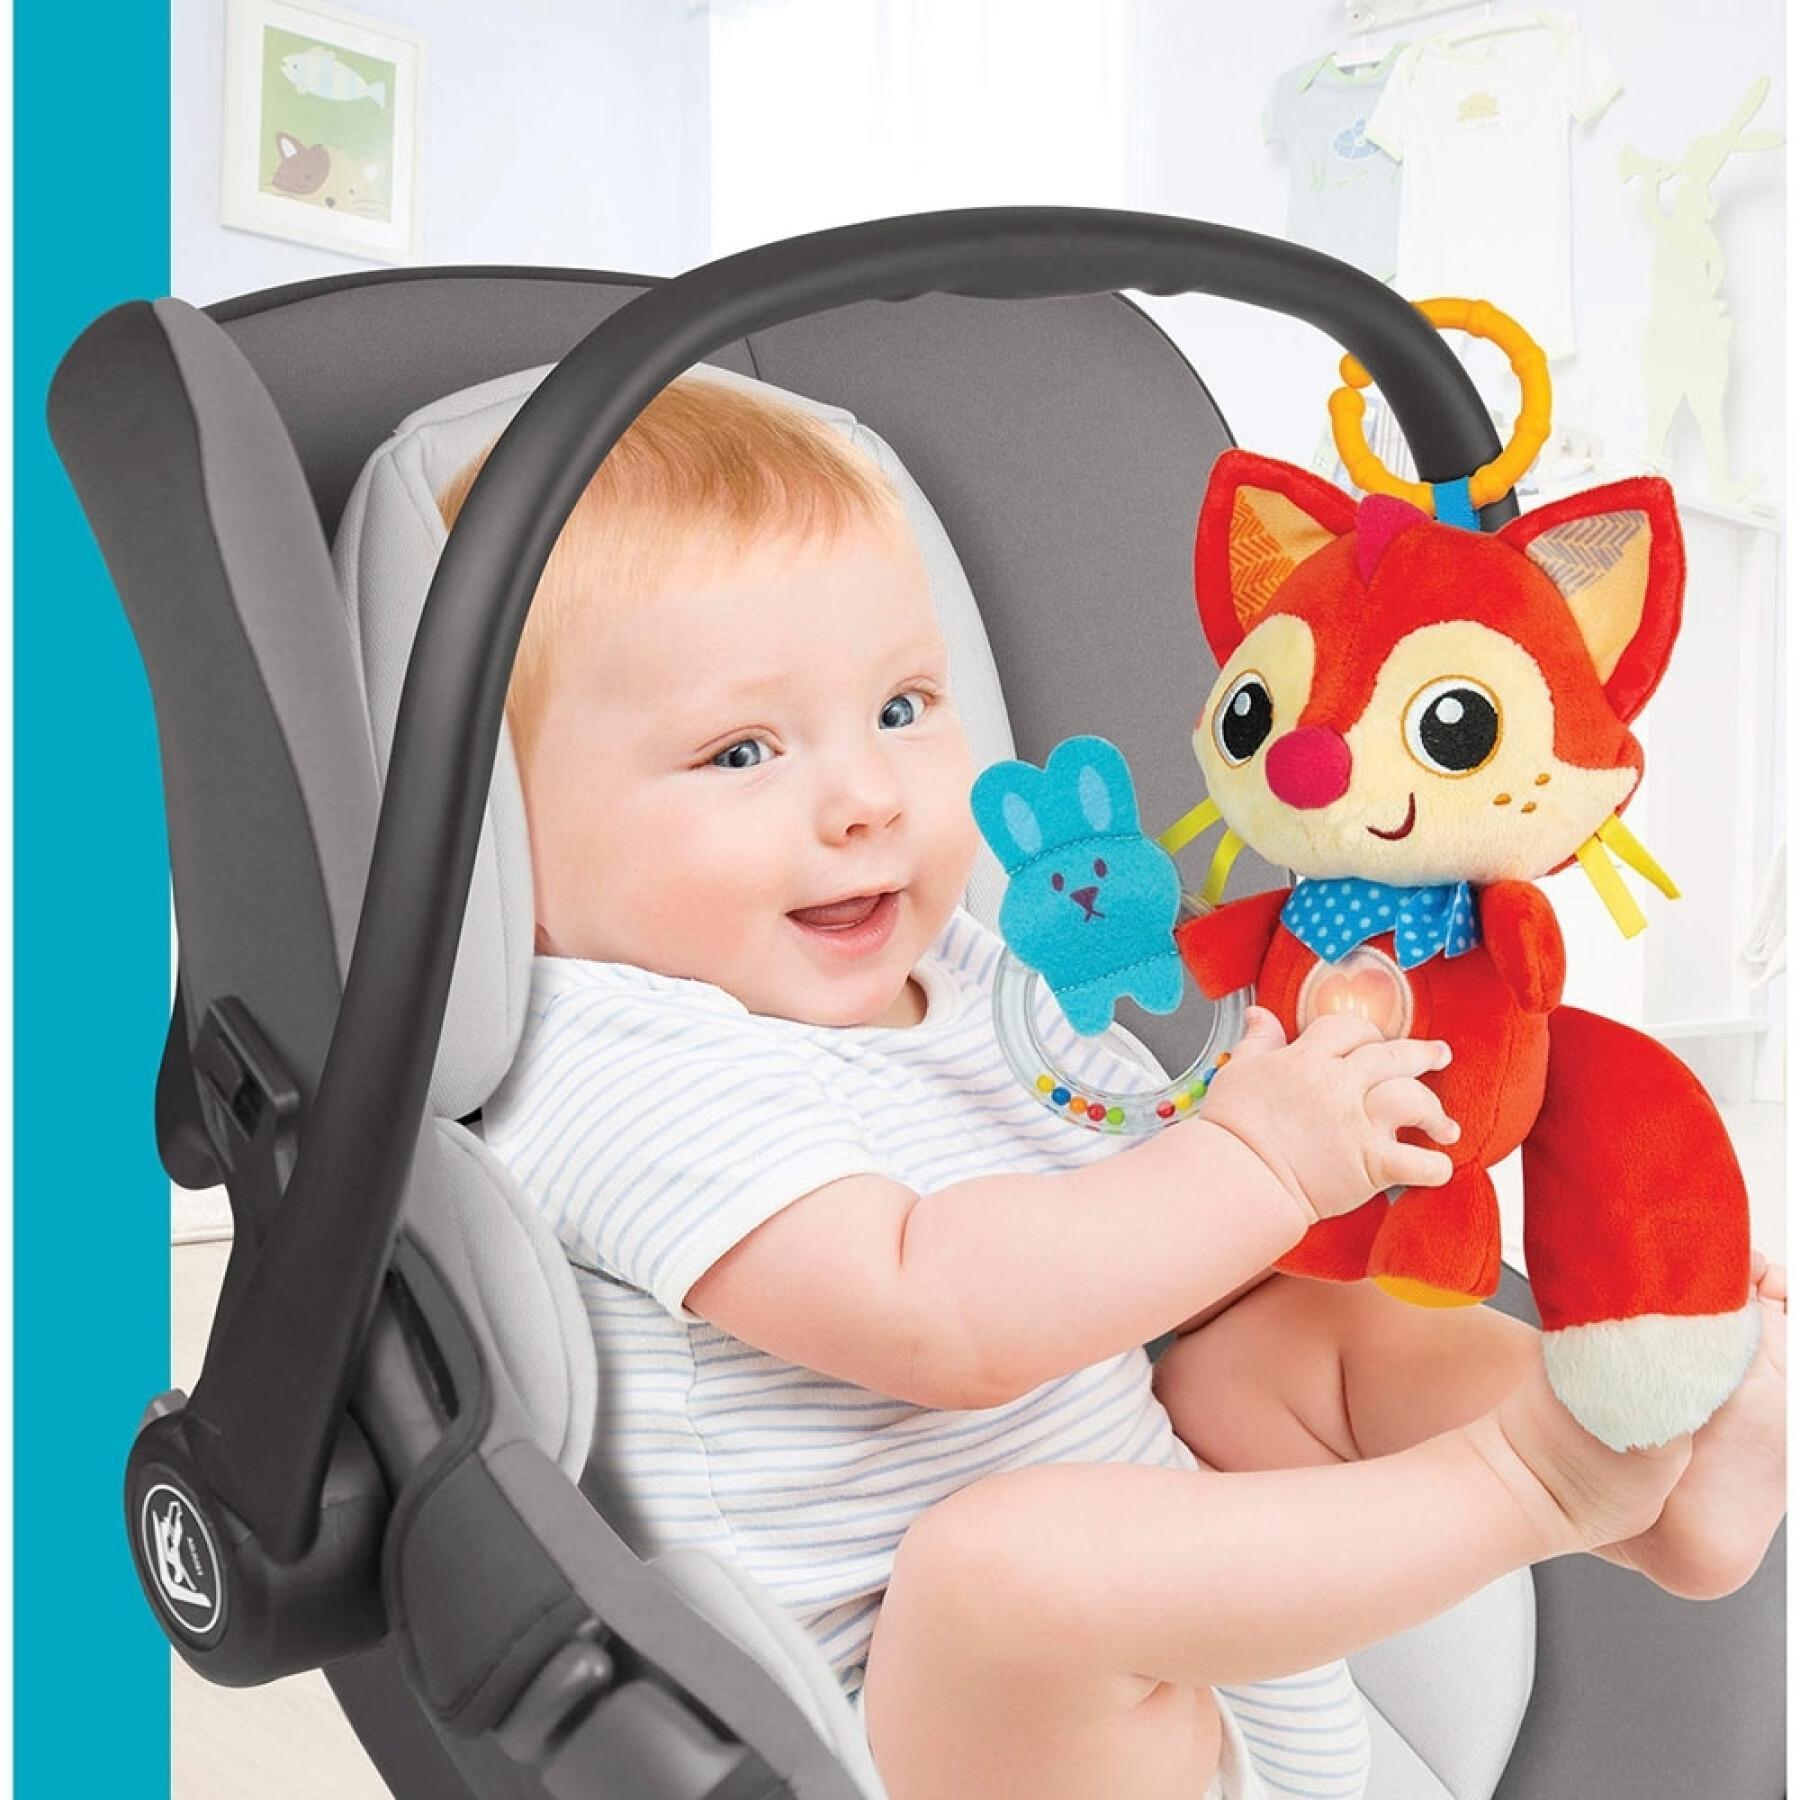 Activity fox with lights, music and sounds Wifun